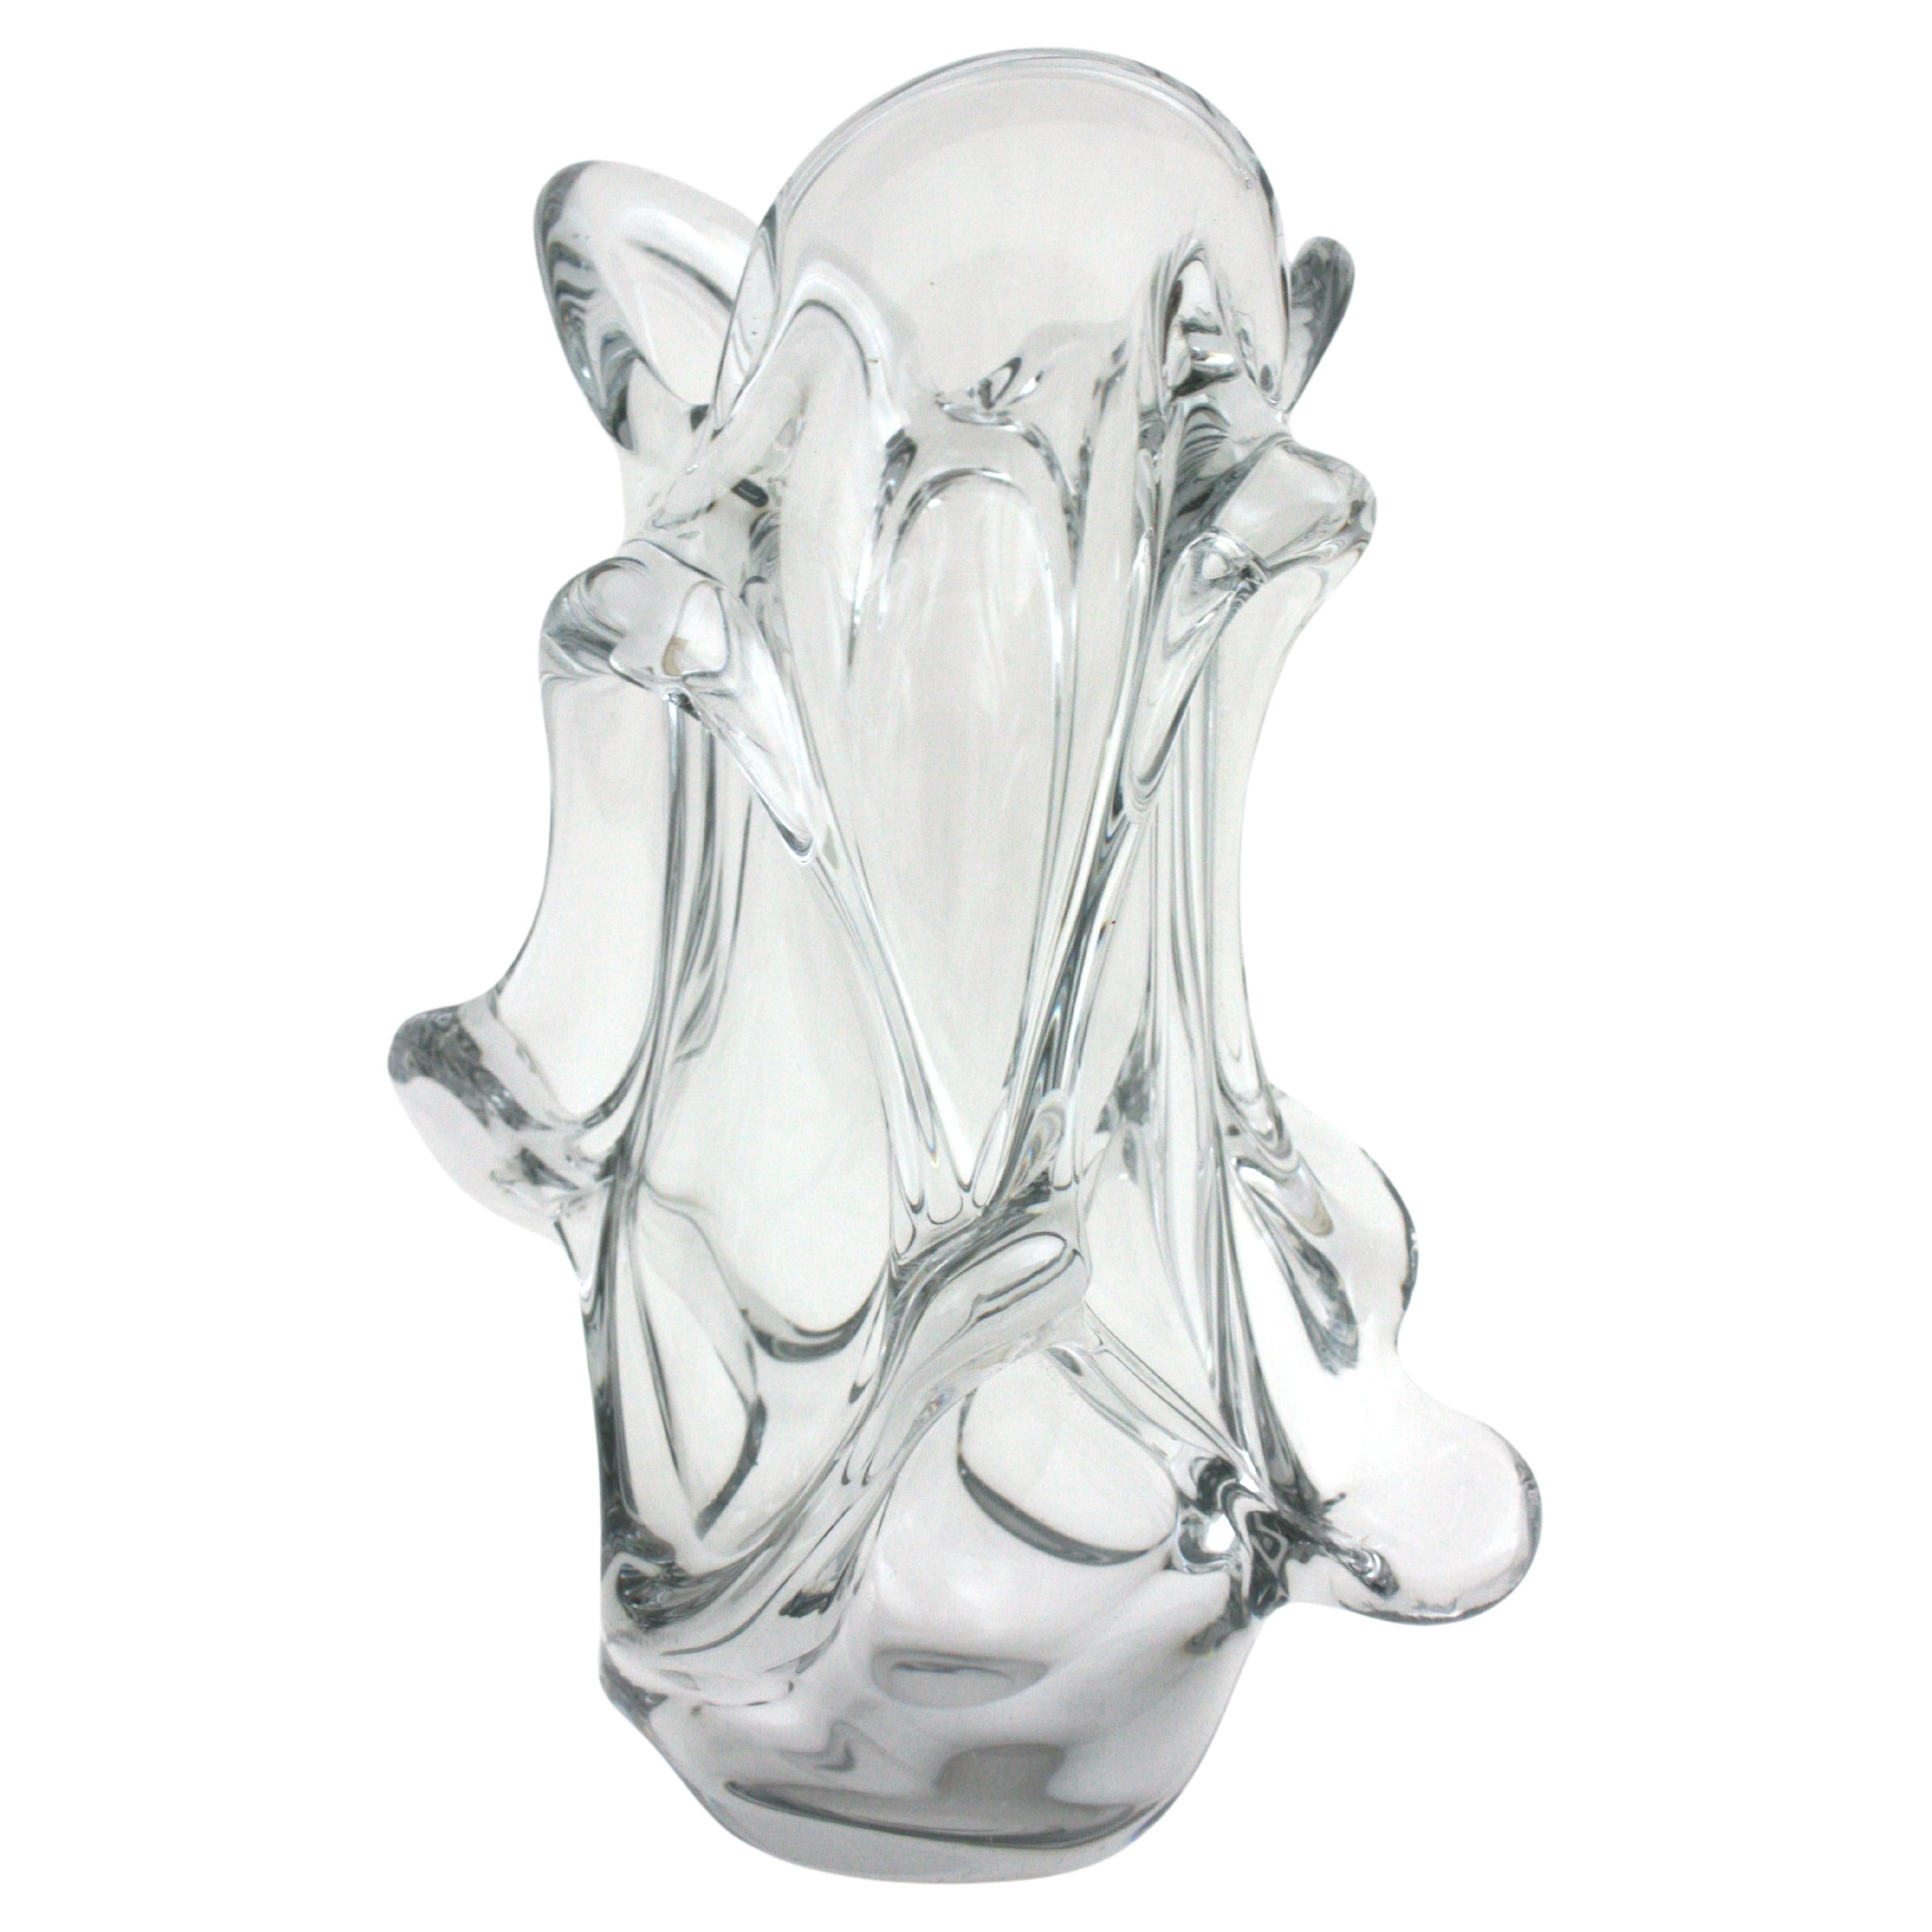 Hand-Crafted Large Murano Organic Shaped Vase in Clear Glass, 1950s For Sale